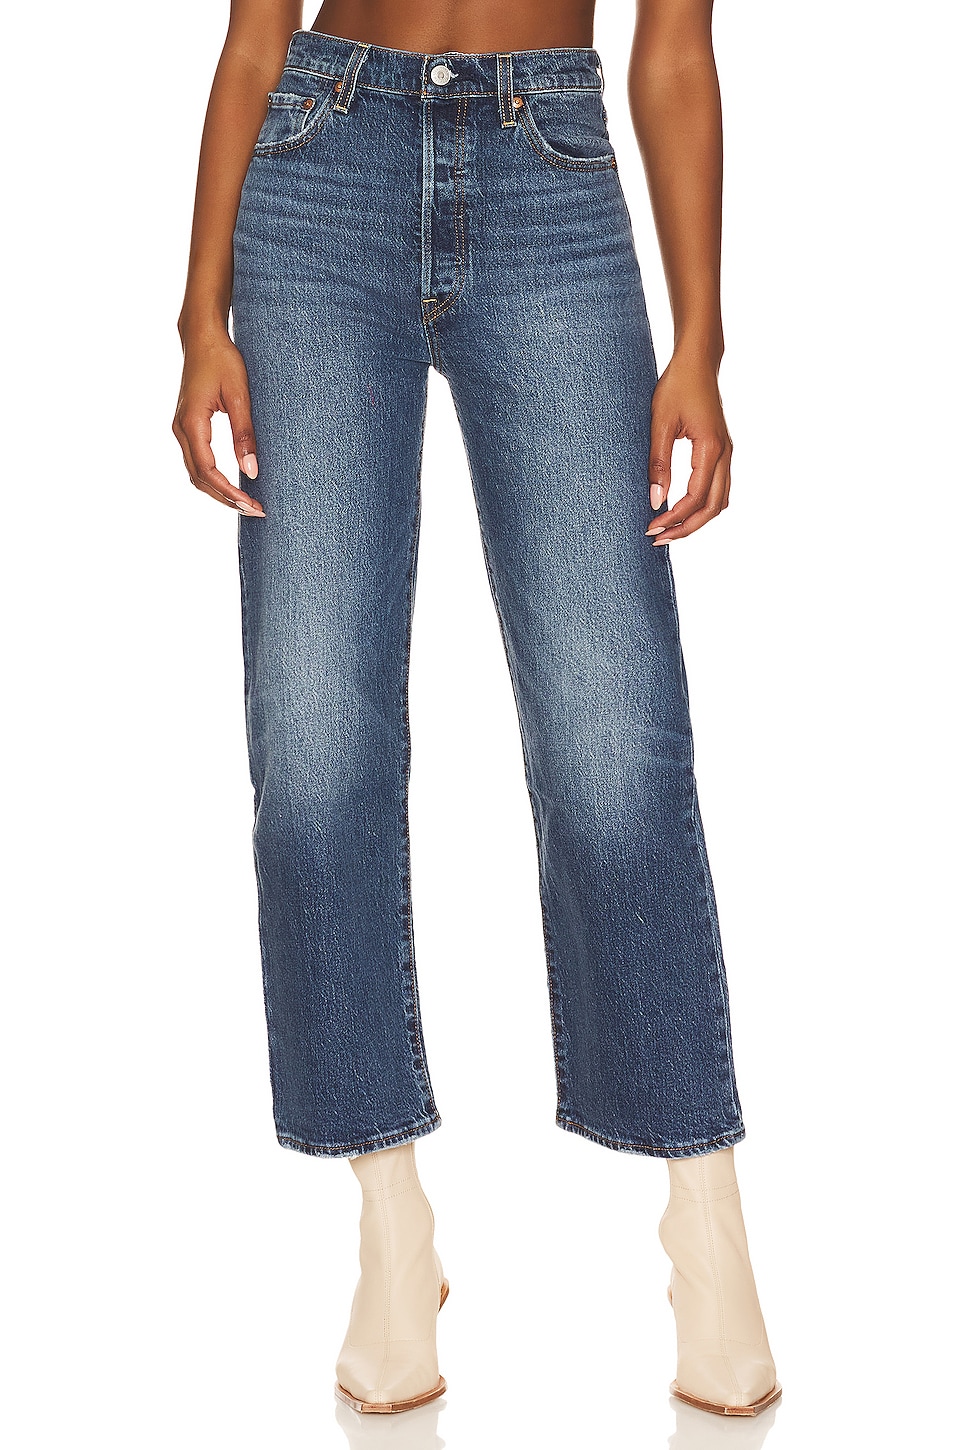 LEVI'S Ribcage Straight Ankle in Valley View | REVOLVE